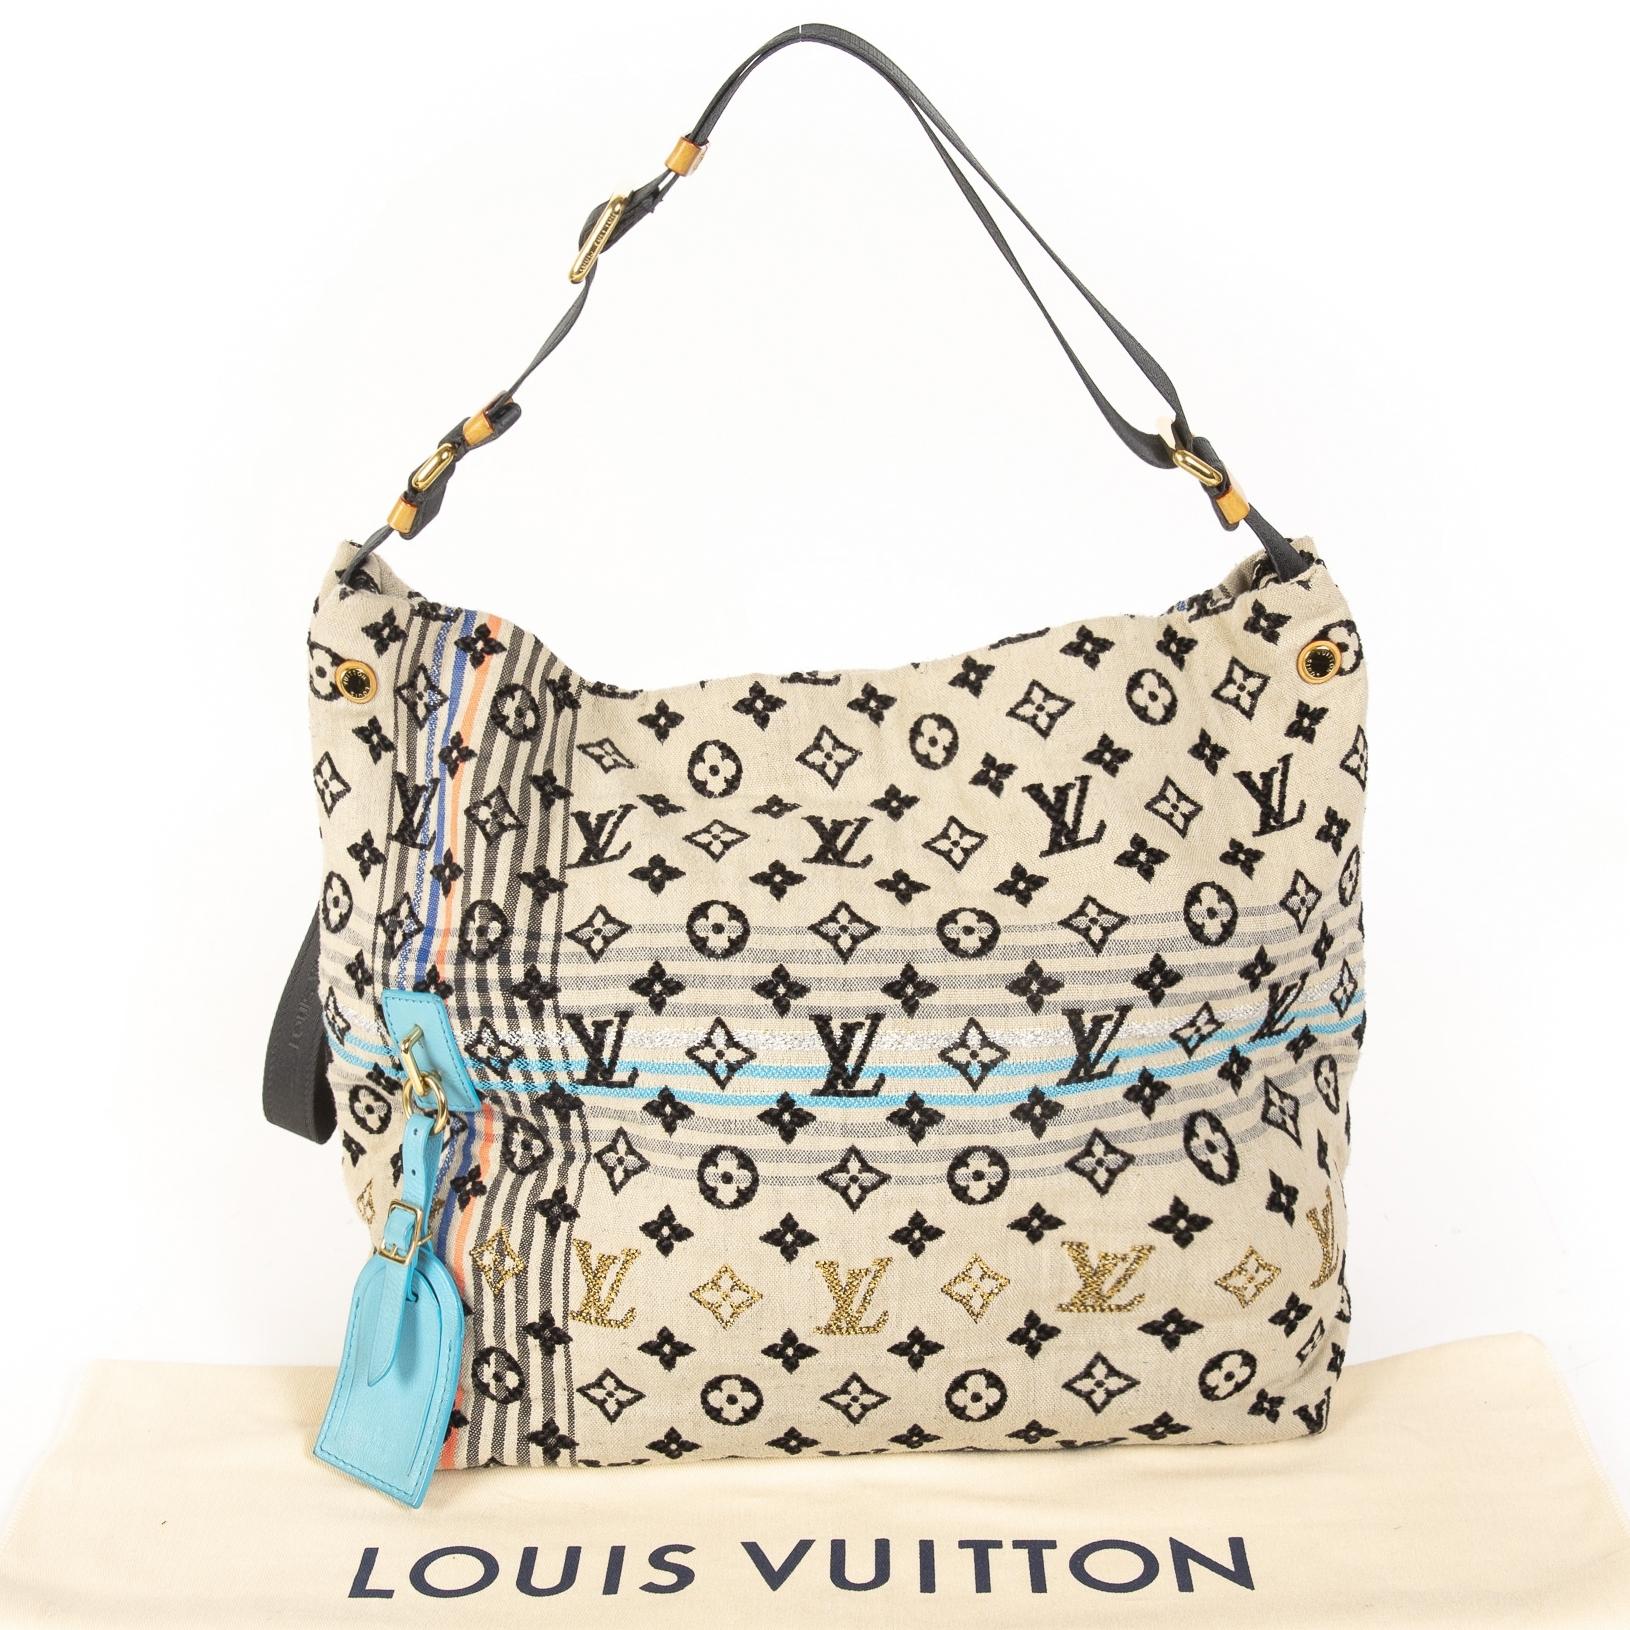 In good condition

Louis Vuitton Cheche Bohemian Tote Bag

This bag is a limited edition from the Spring/Summer 2010 collection. Beige and black monogram jacquard woven Louis Vuitton Cheche Bohemian bag with blue, silver and pink details. Comes with